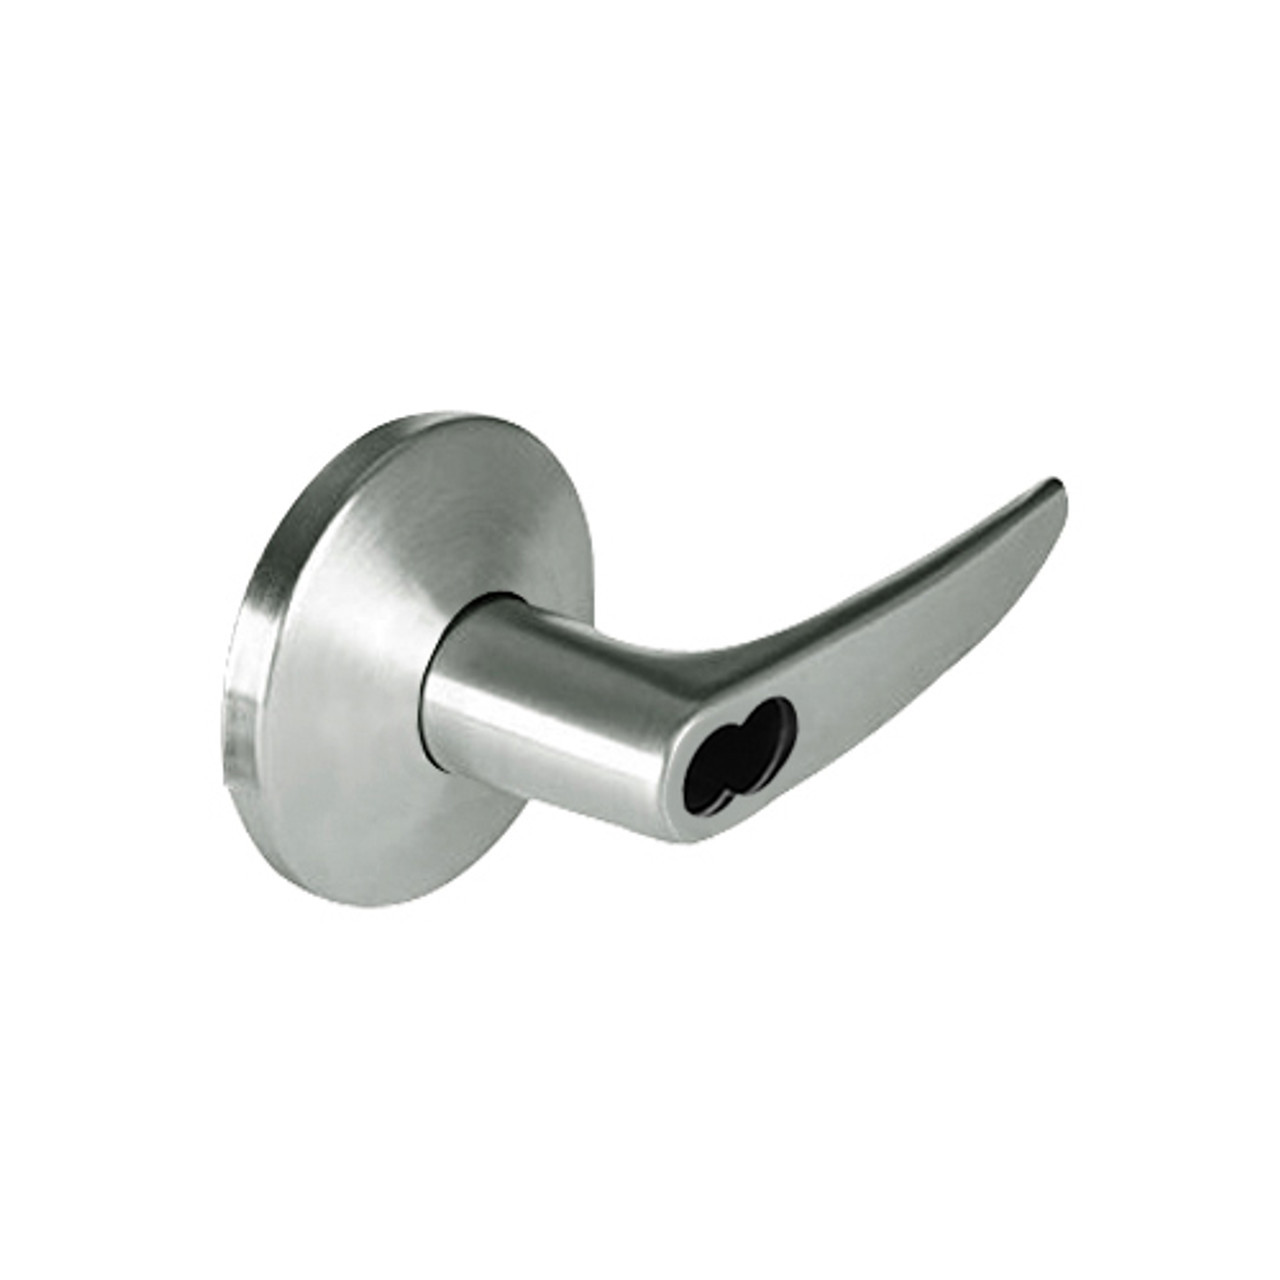 9K47AB16LS3619LM Best 9K Series Entrance Cylindrical Lever Locks with Curved without Return Lever Design Accept 7 Pin Best Core in Satin Nickel